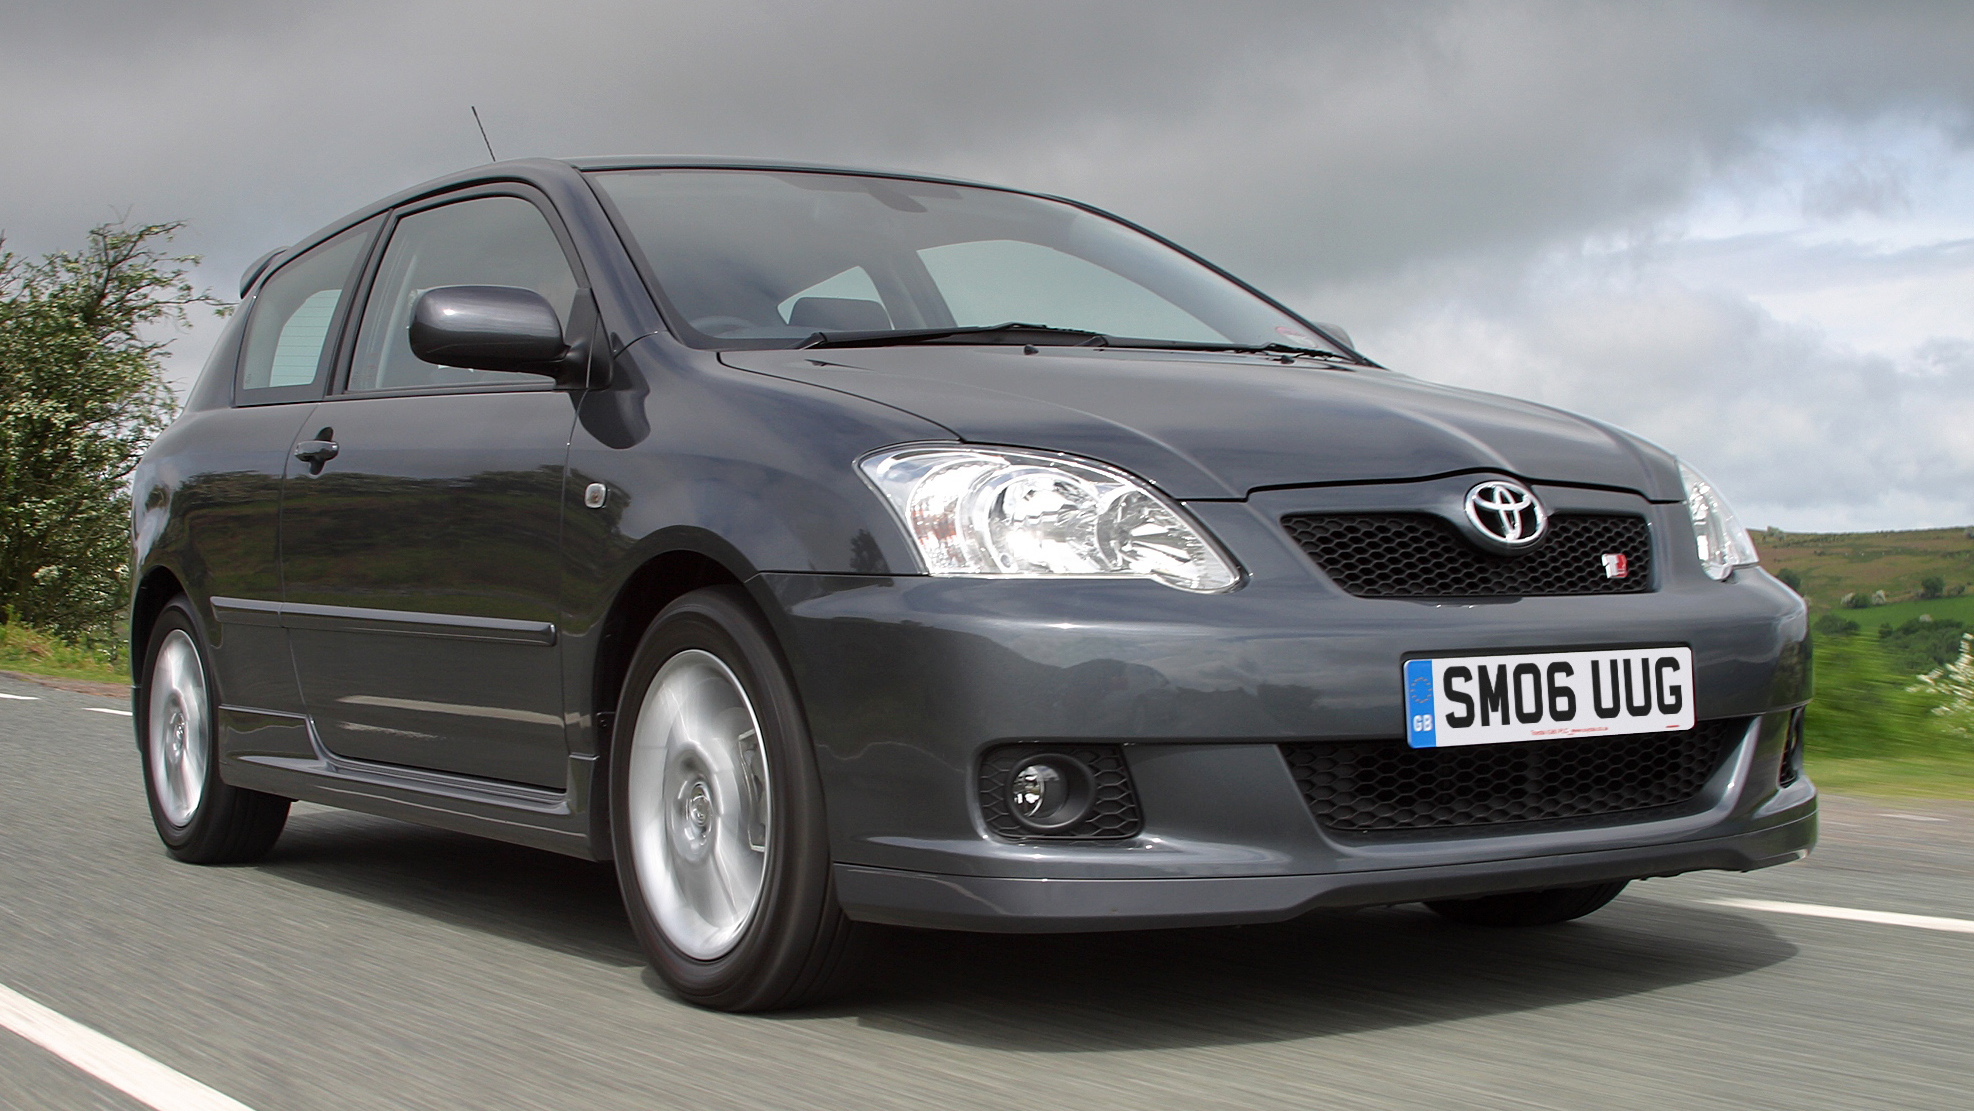 10 interesting used cars for under £5k we found this week